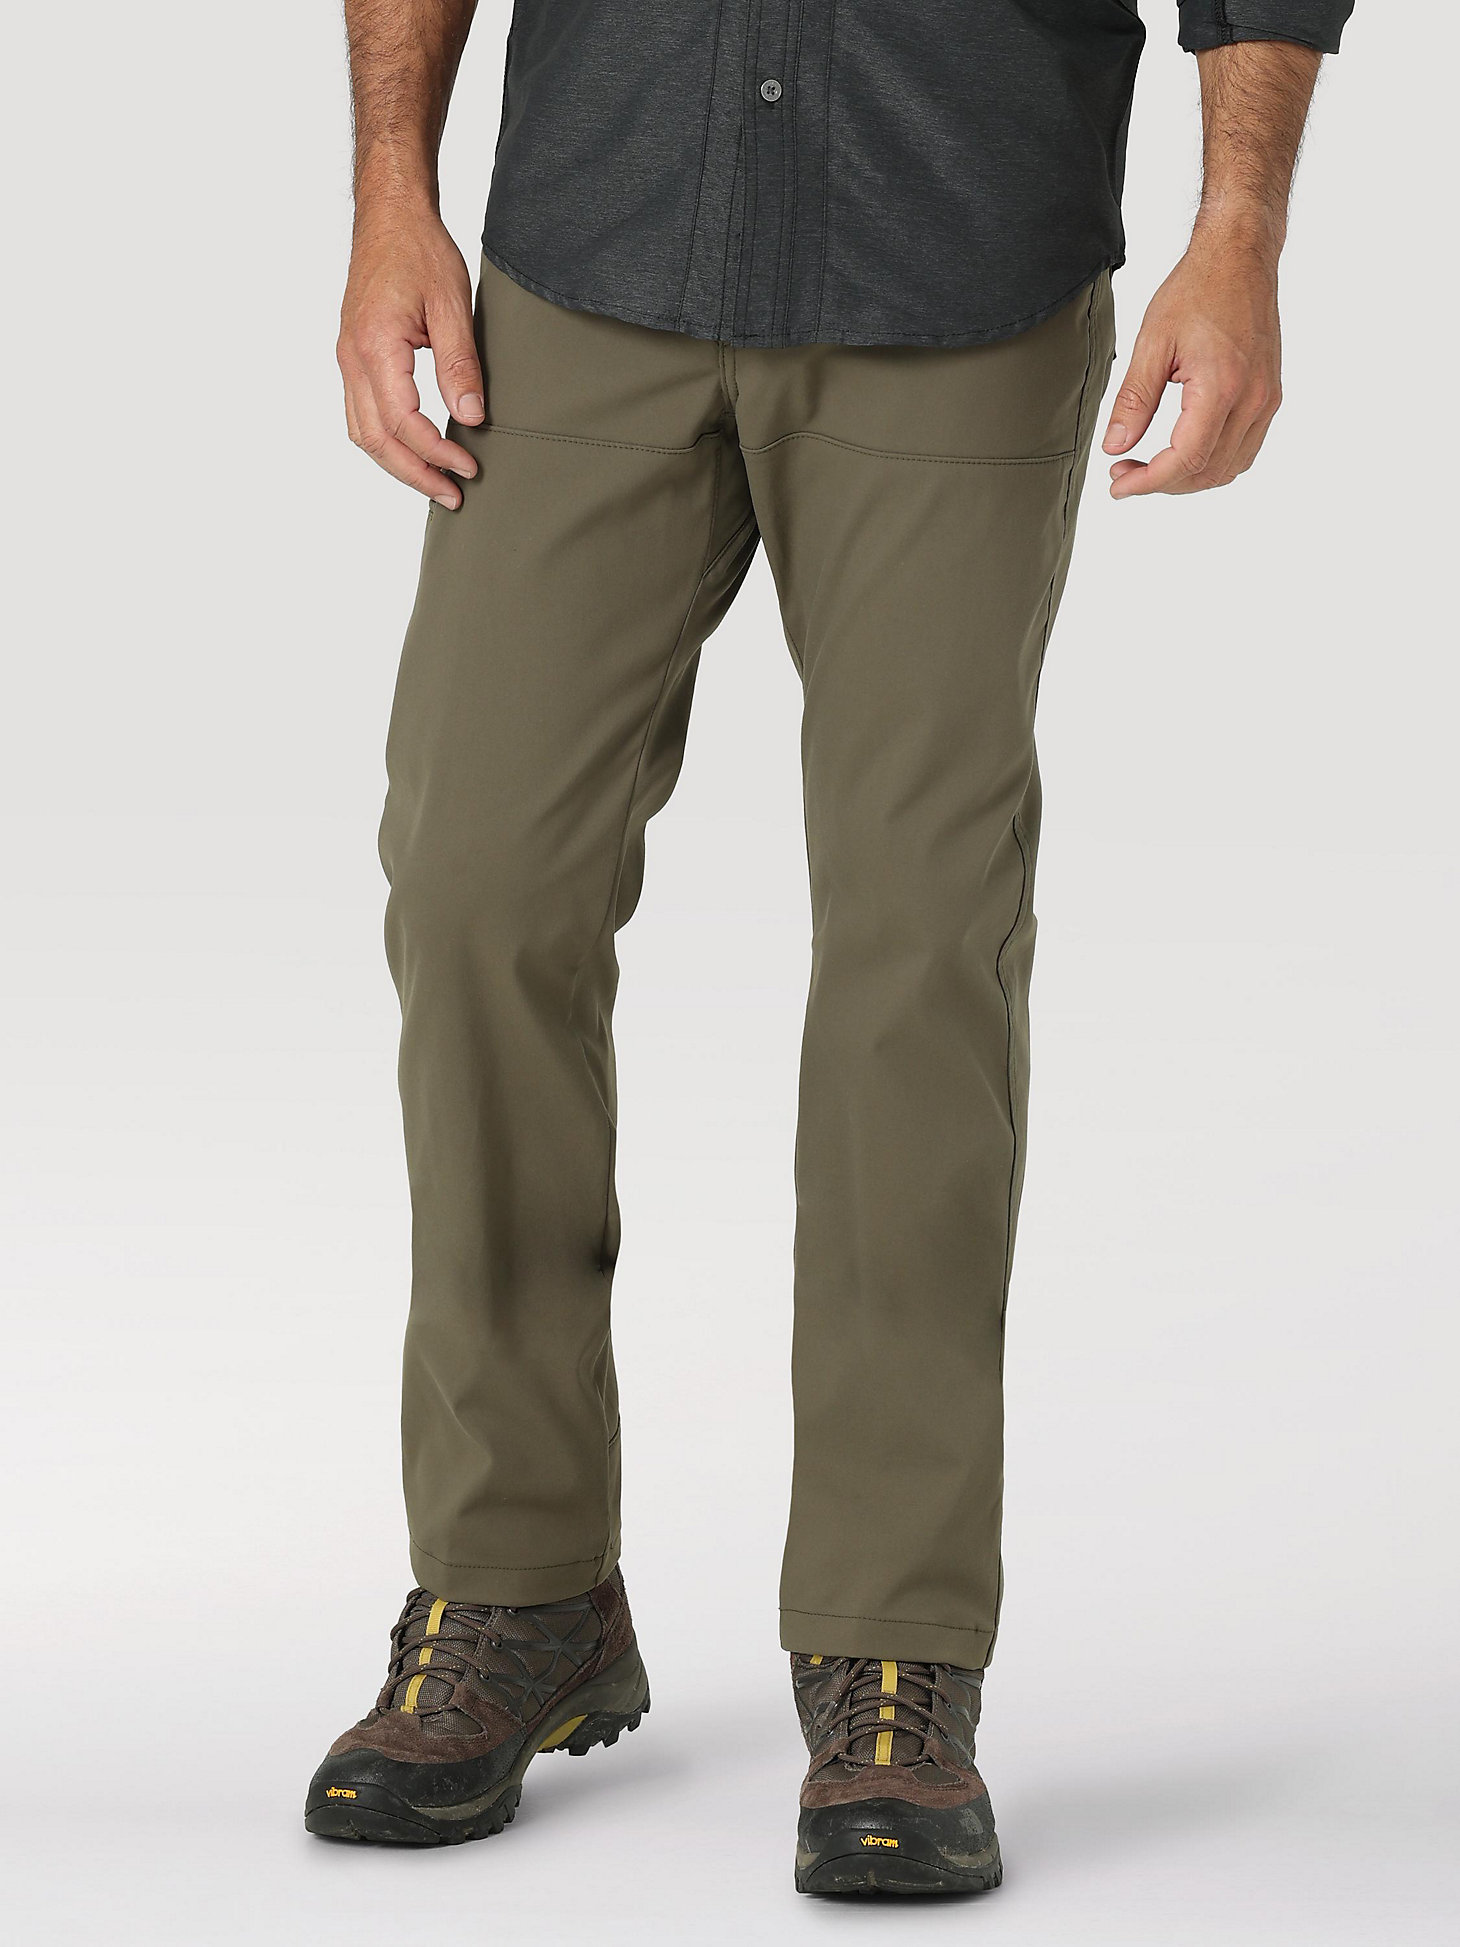 Synthetic Utility Pant in Kelp main view